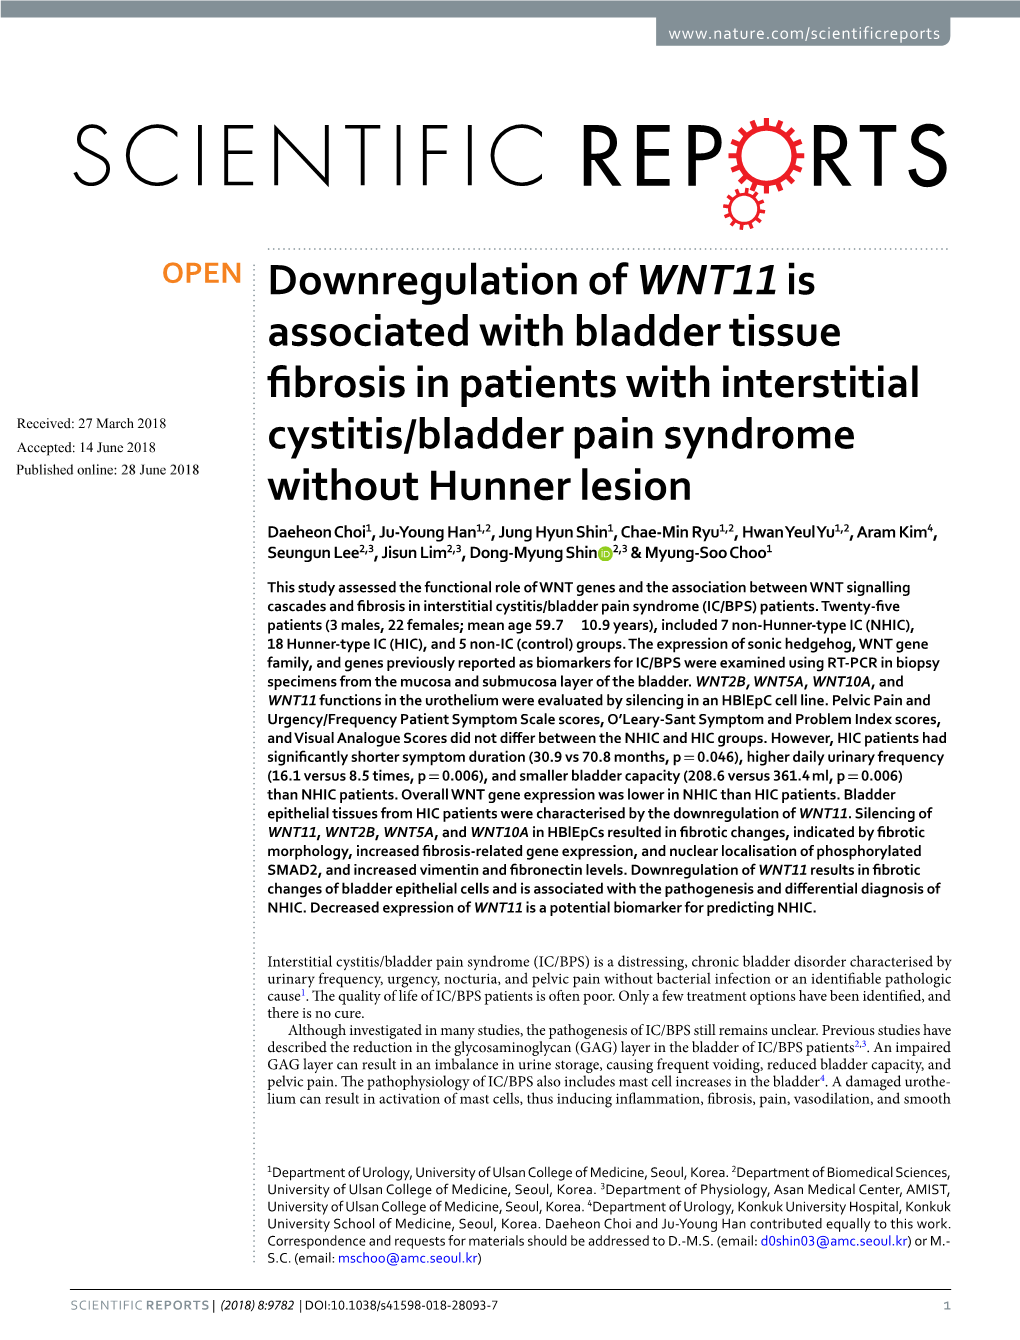 Downregulation of WNT11 Is Associated with Bladder Tissue